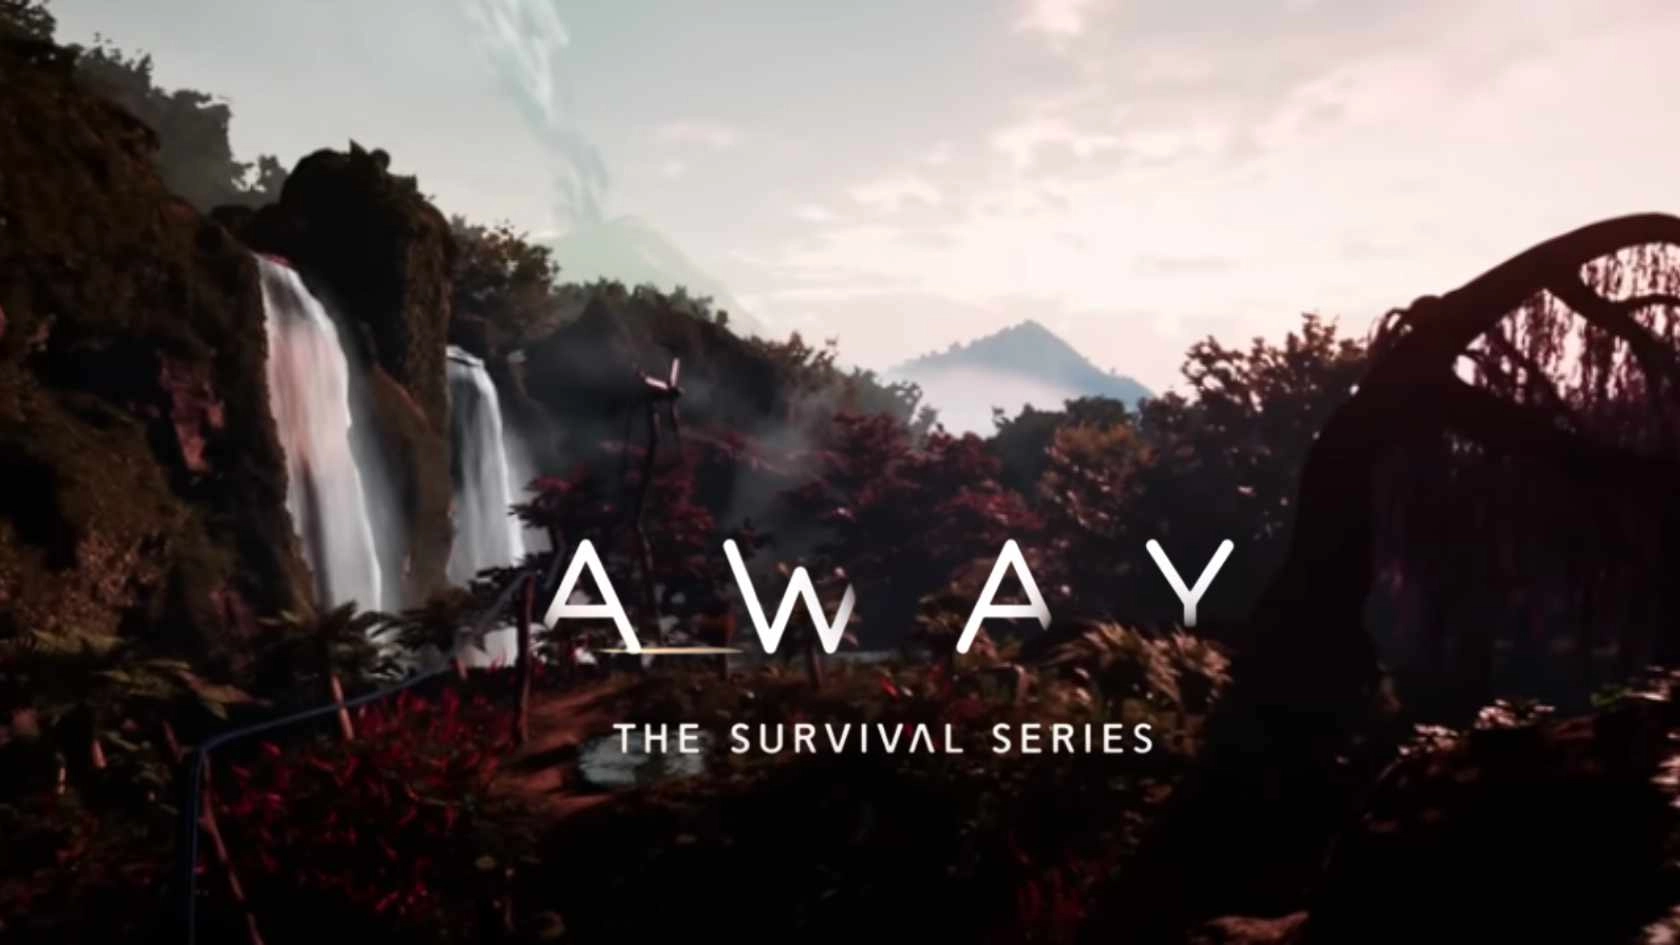 Away The Survival Series Parents Guide and Age Rating